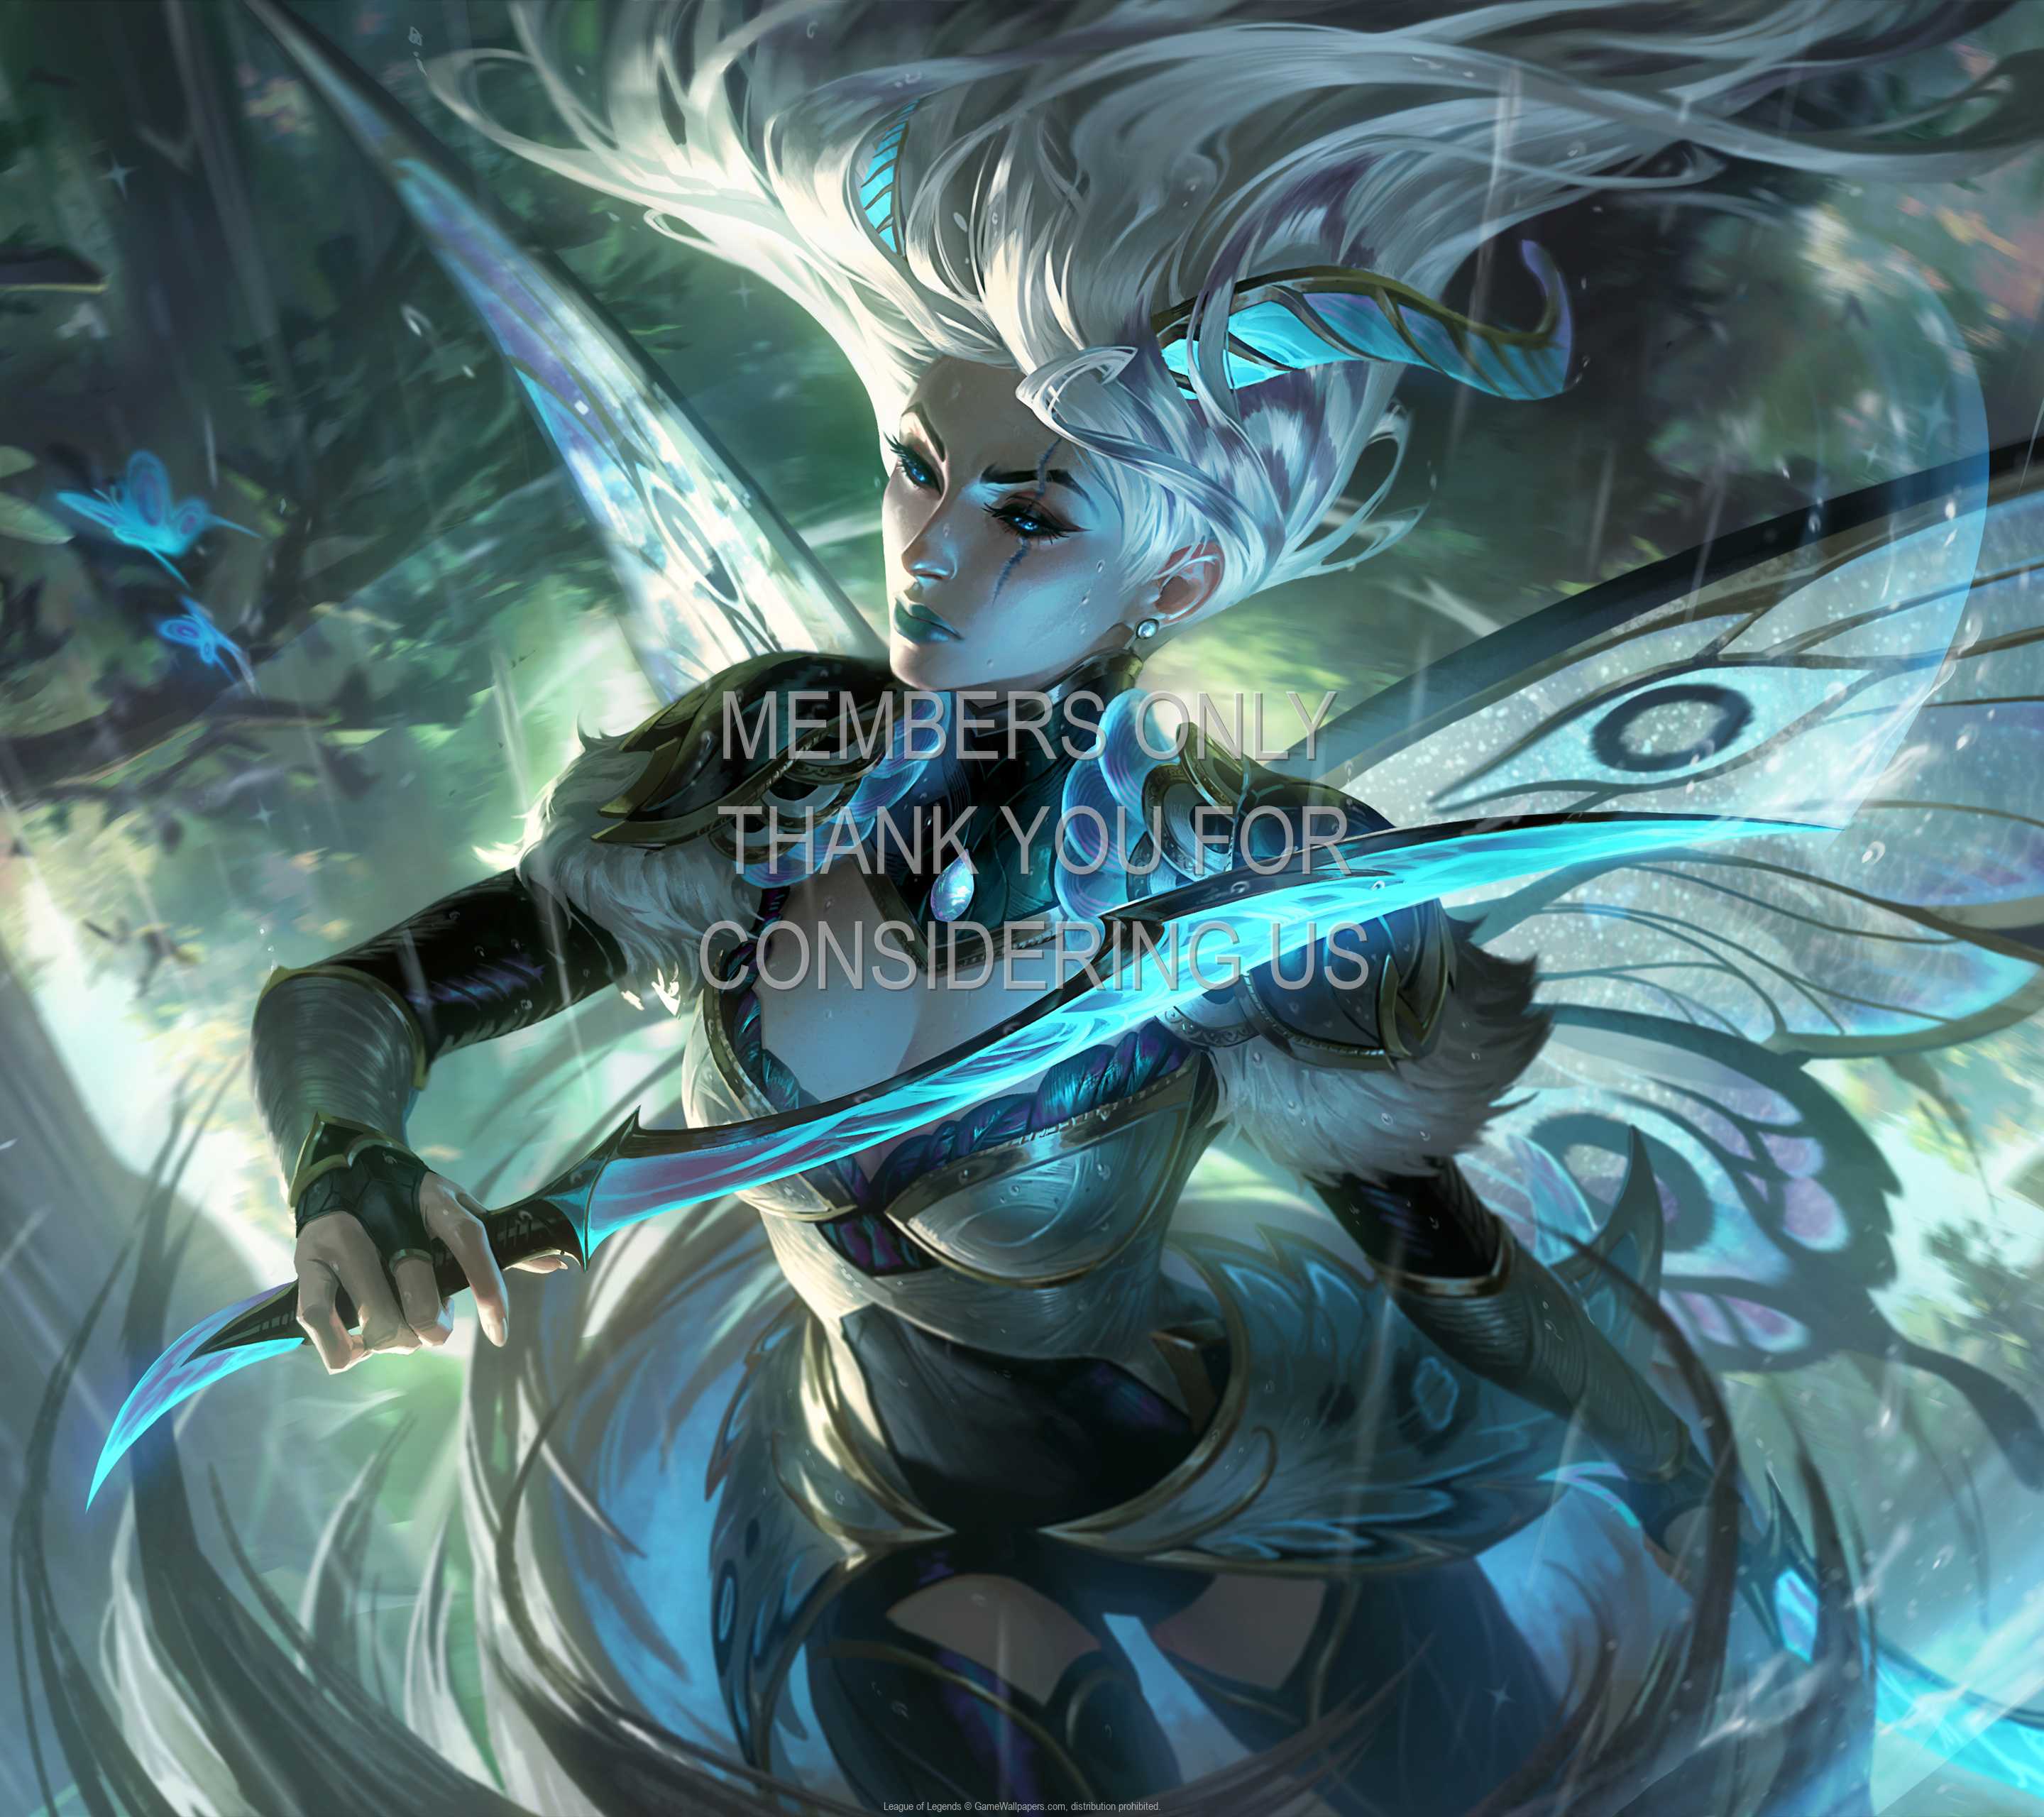 League of Legends 1440p Horizontal Mobile wallpaper or background 139